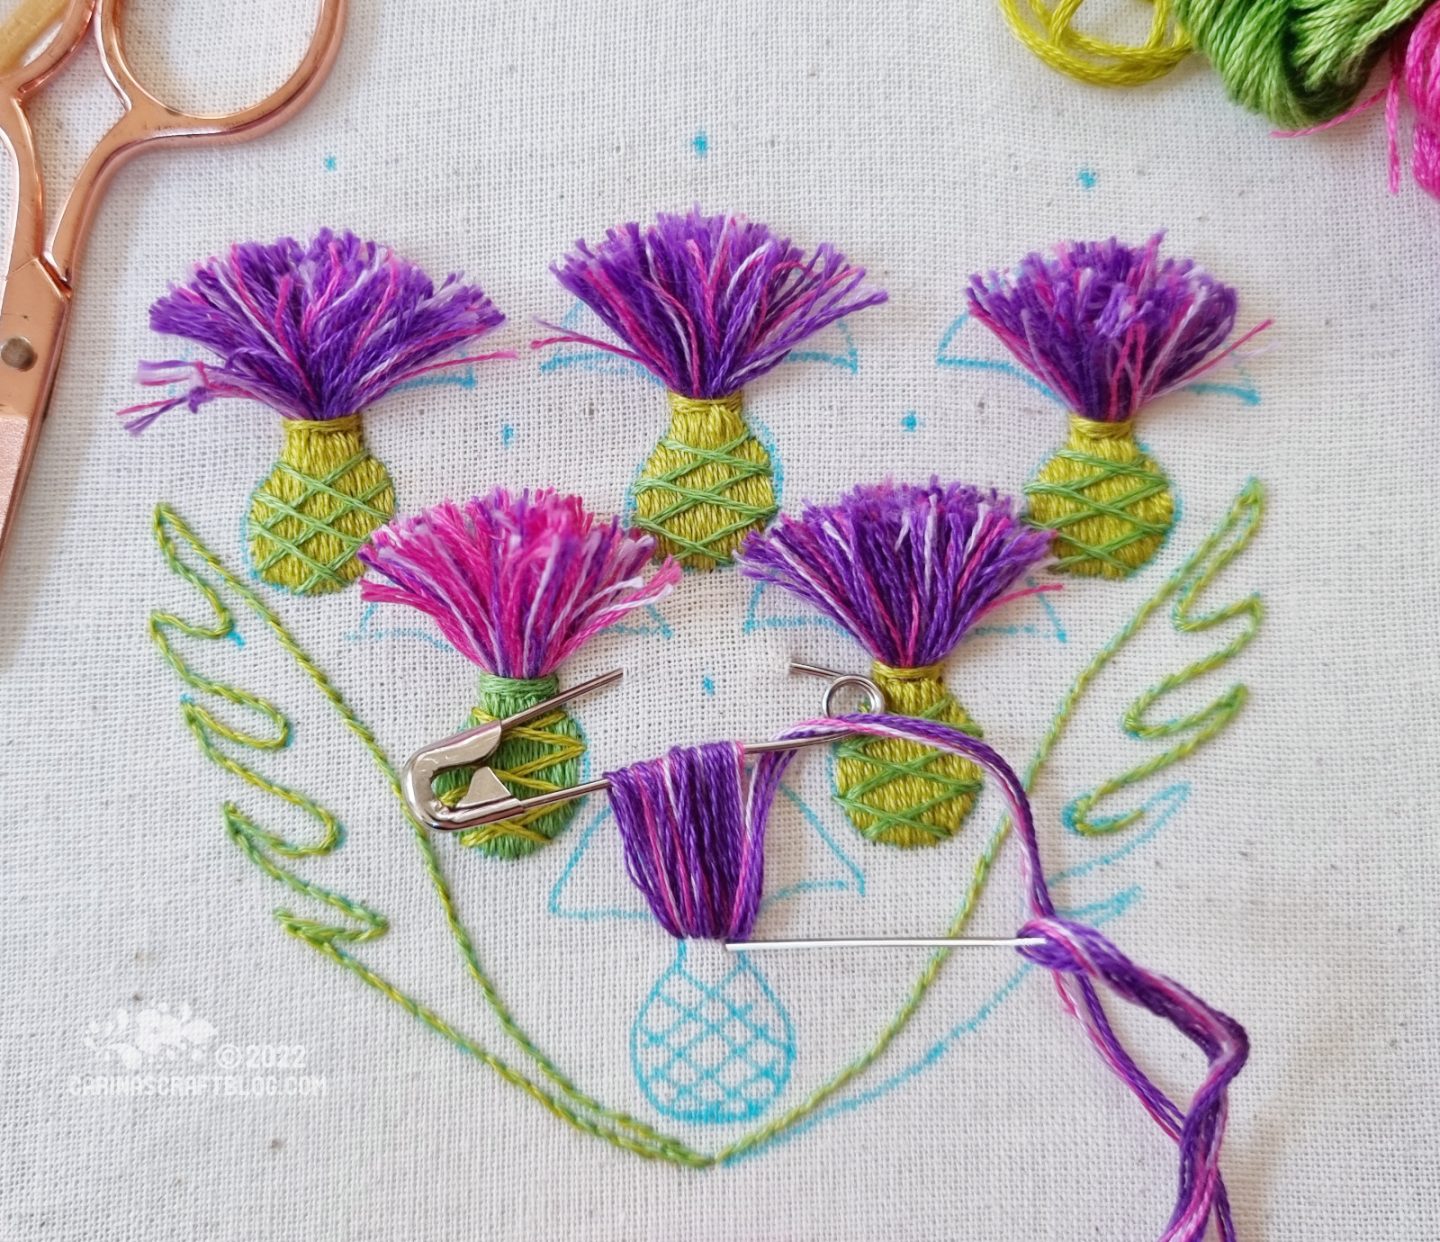 The Best Embroidery Books To Learn Hand Embroidery 